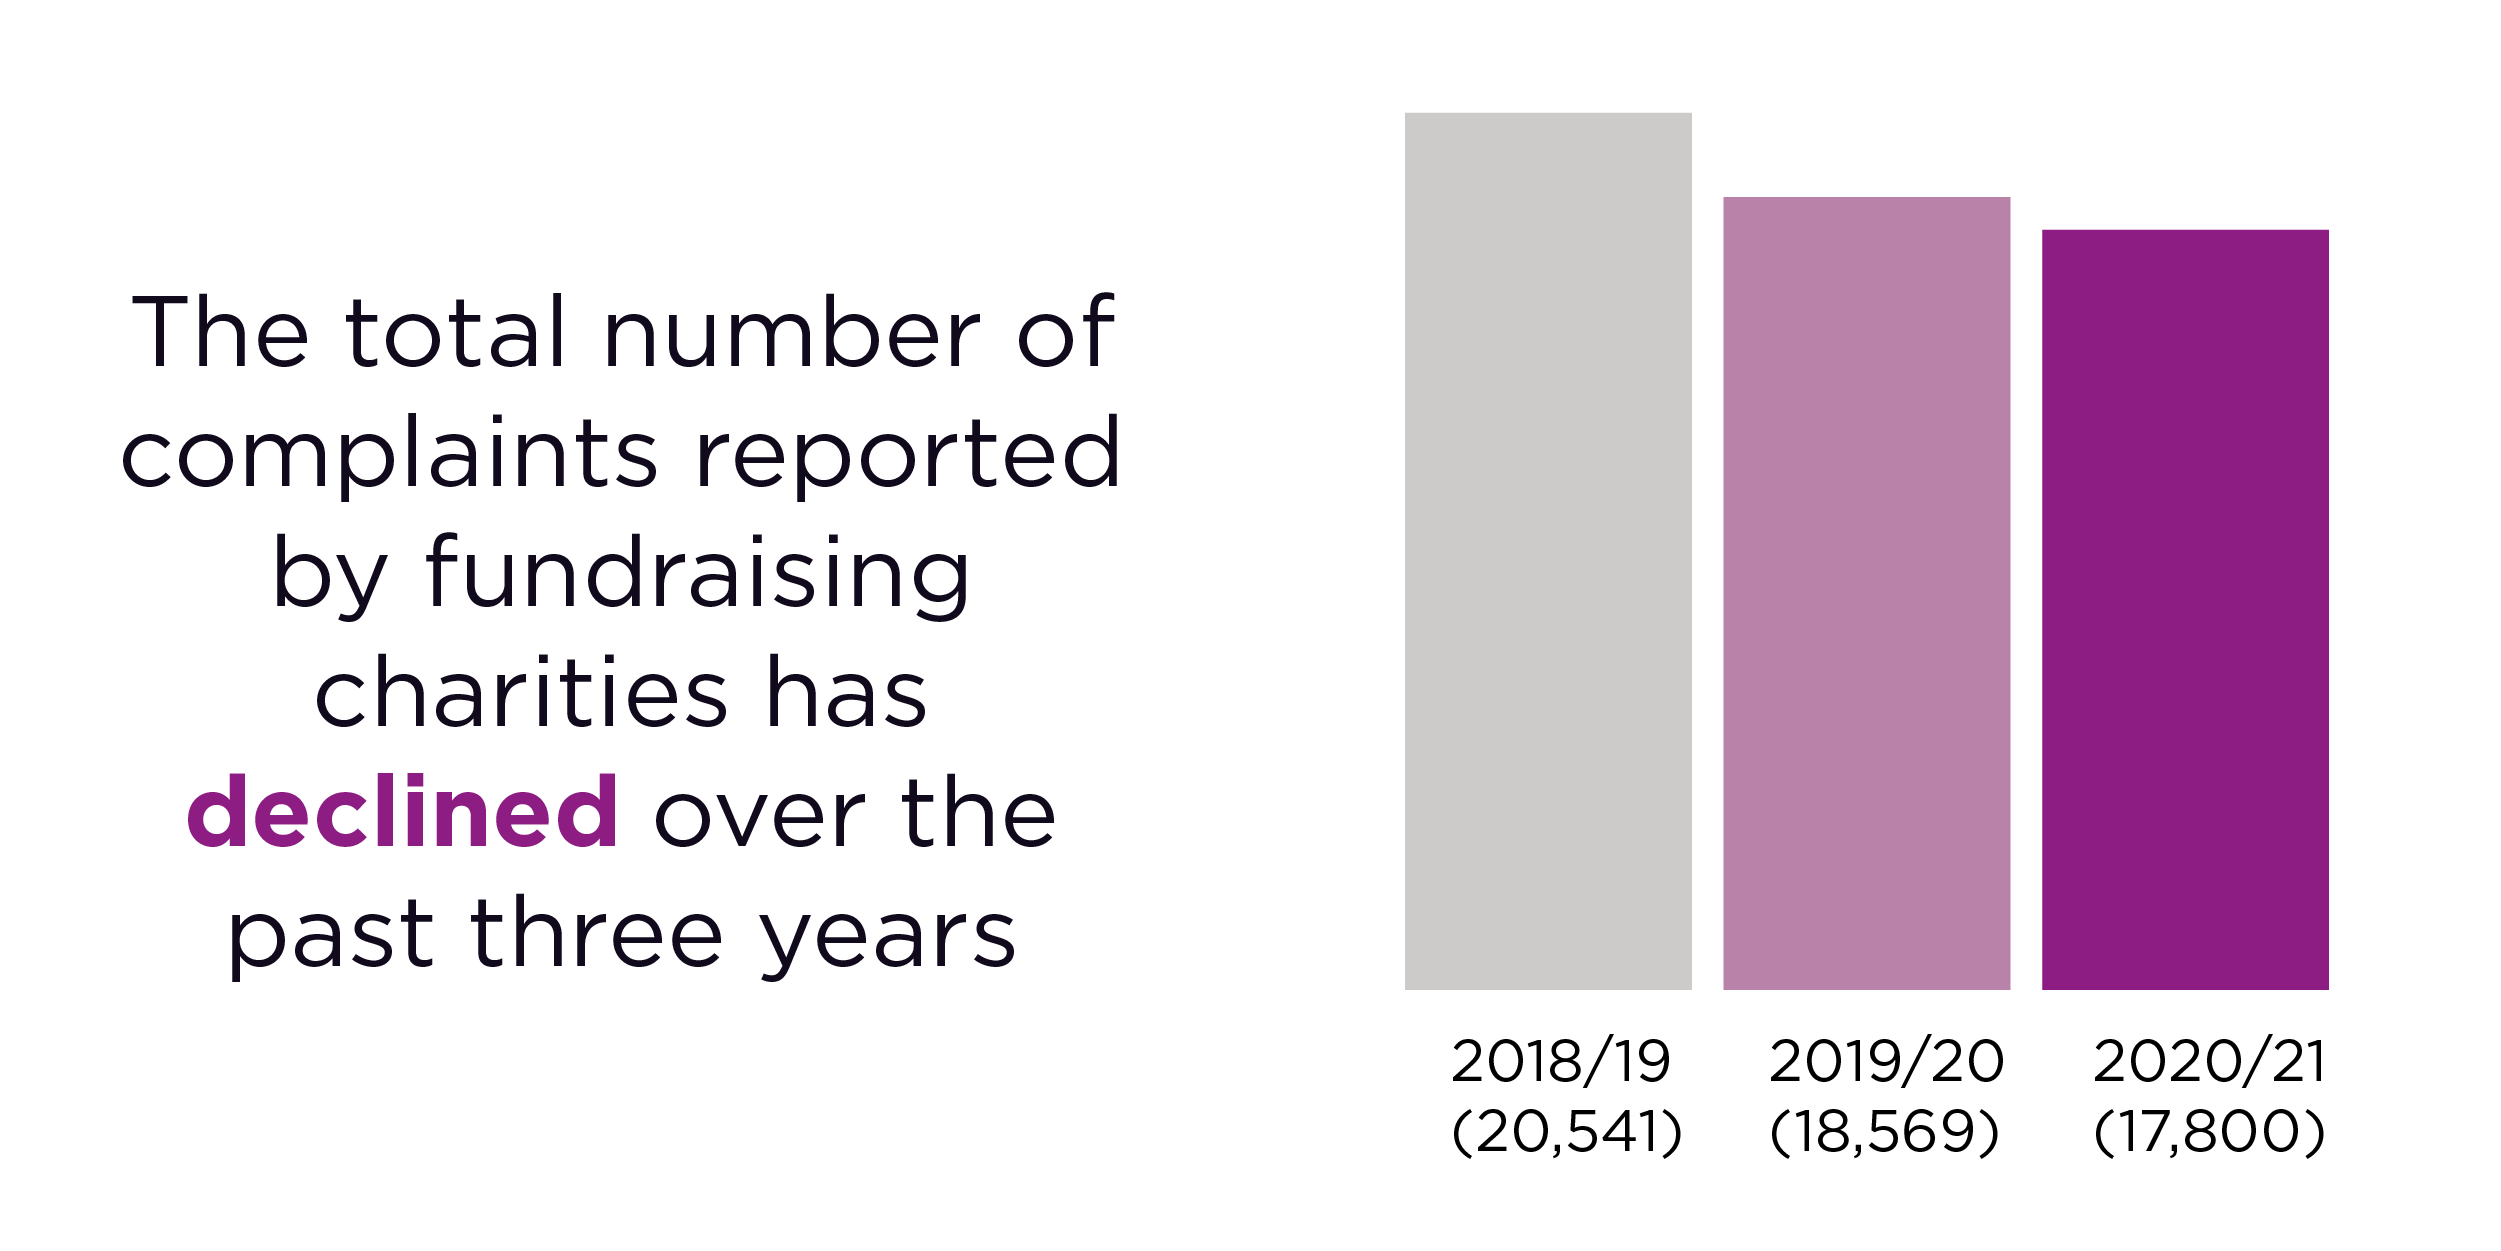 The total number of complaints reported by fundraising charities has declined over the past three years